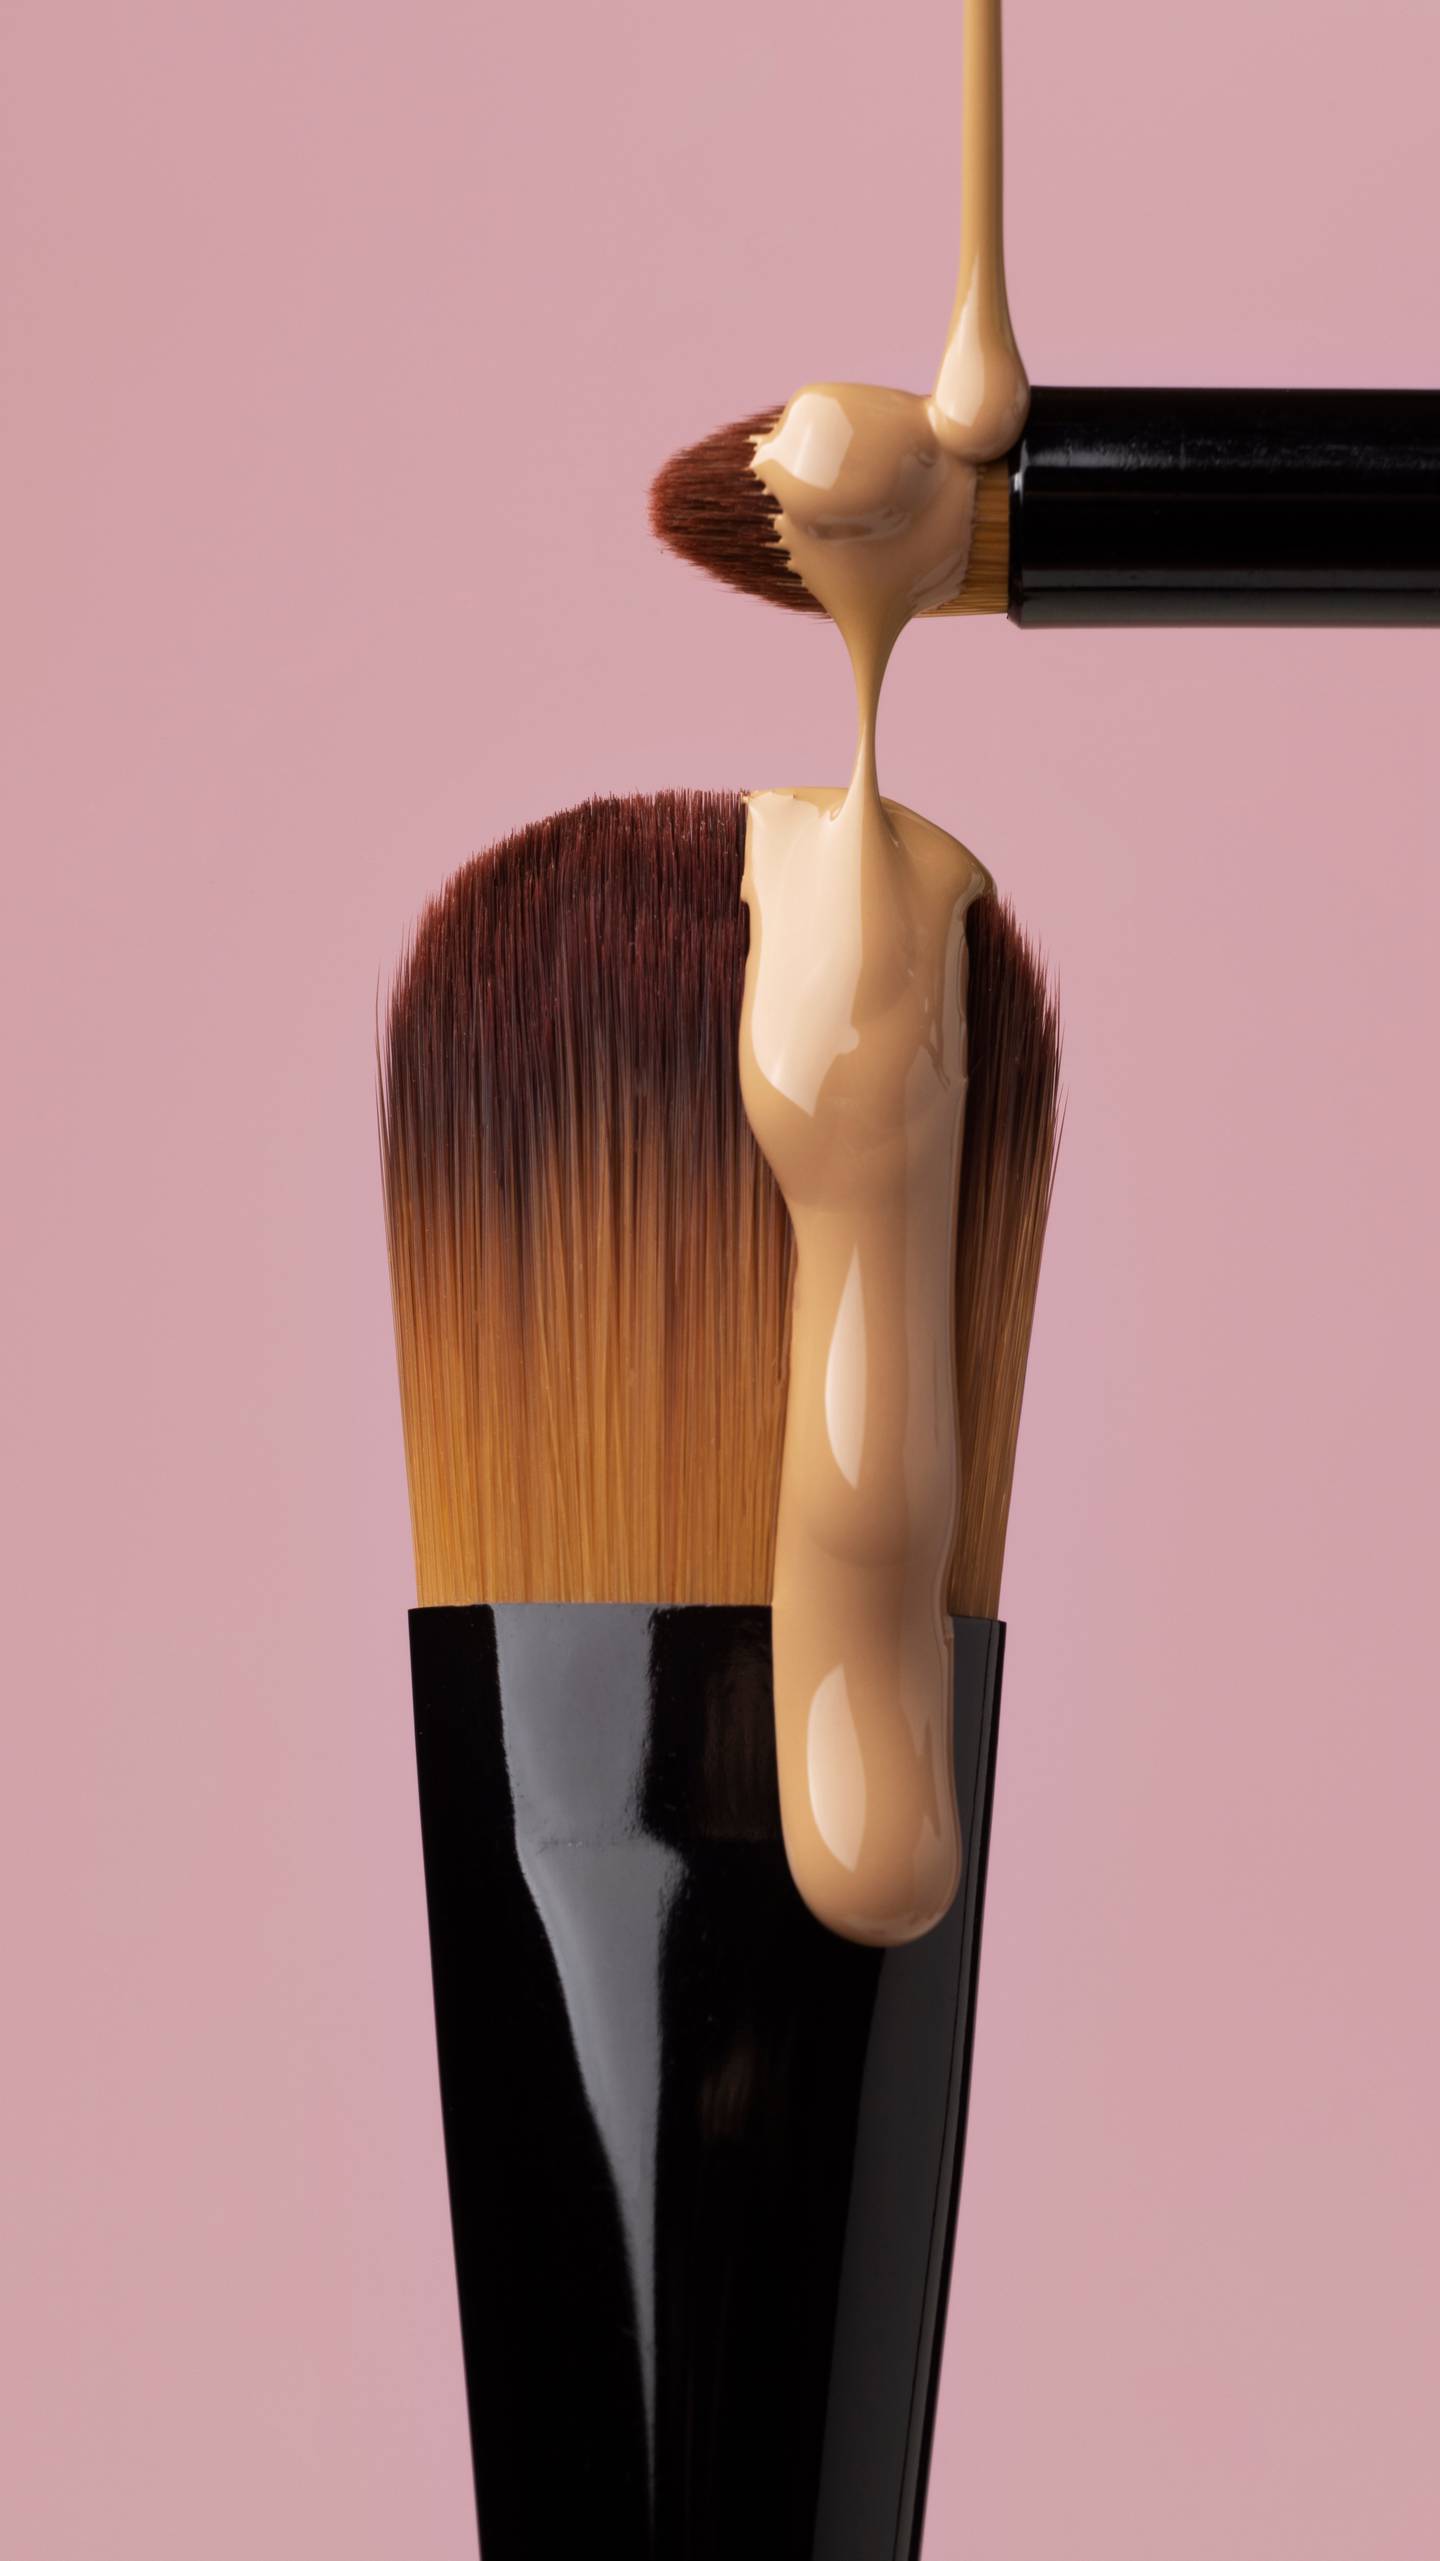 An image of foundation dripping down a makeup brush.